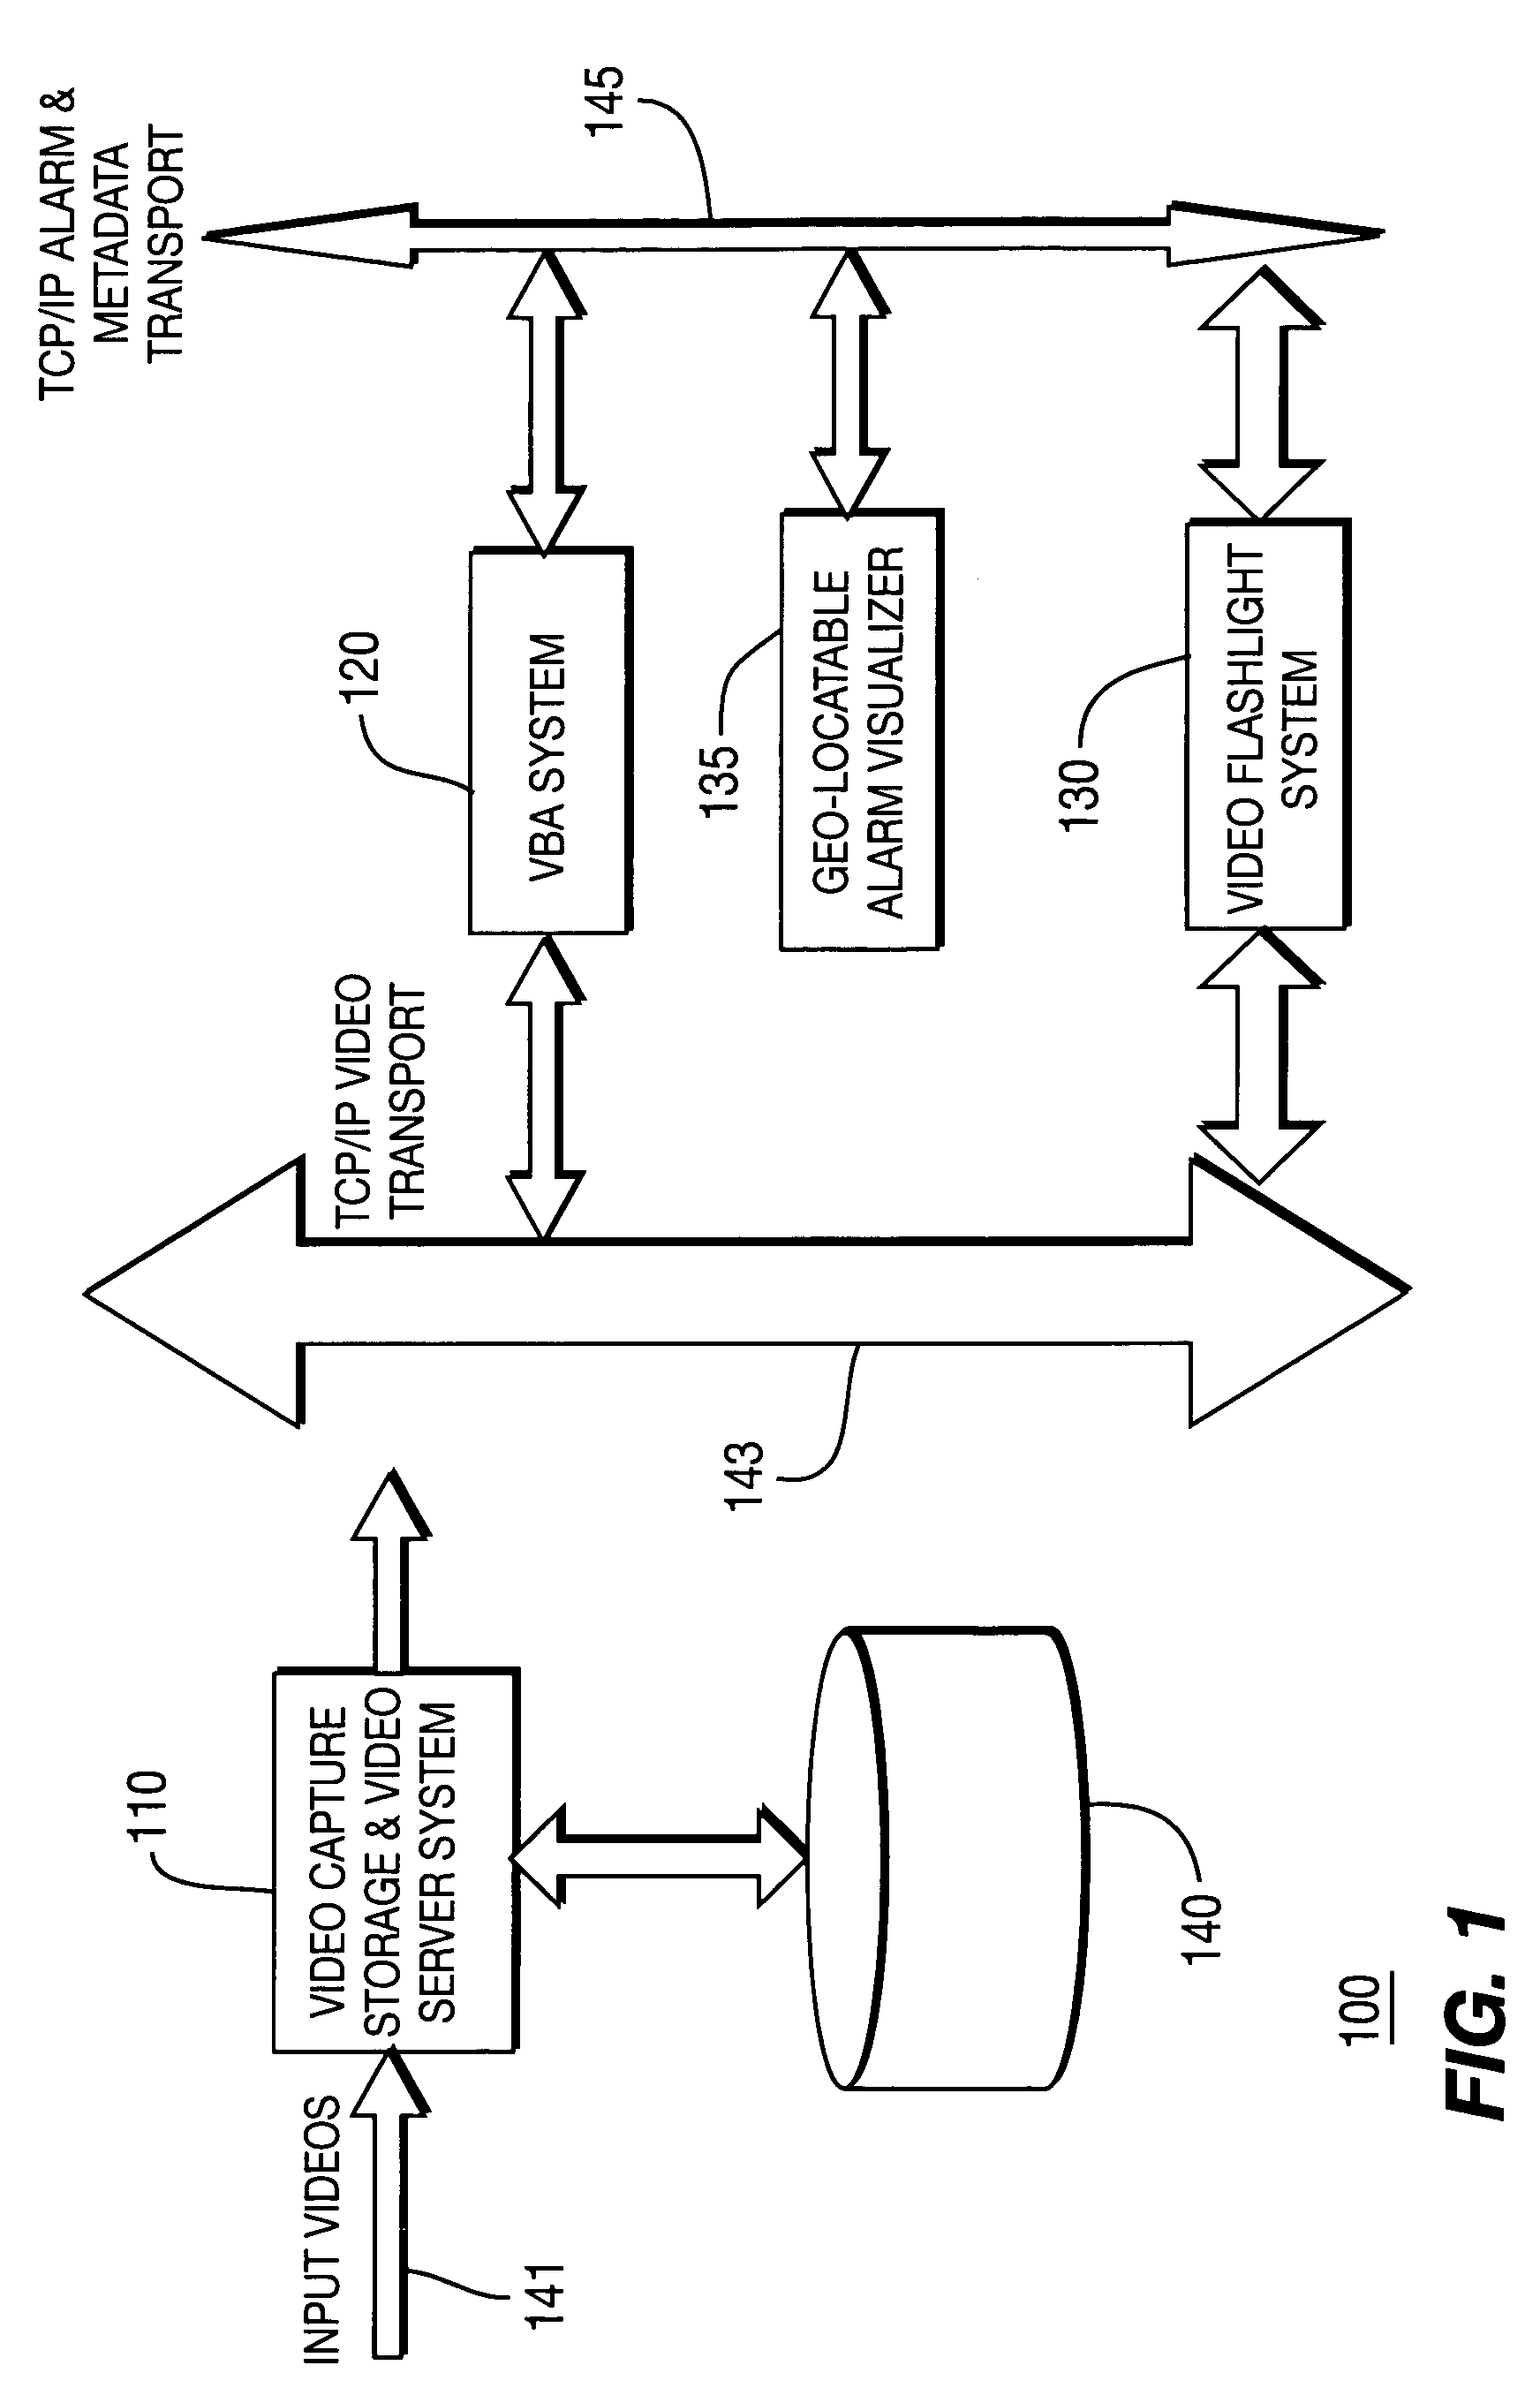 Method and apparatus for providing a scalable multi-camera distributed video processing and visualization surveillance system